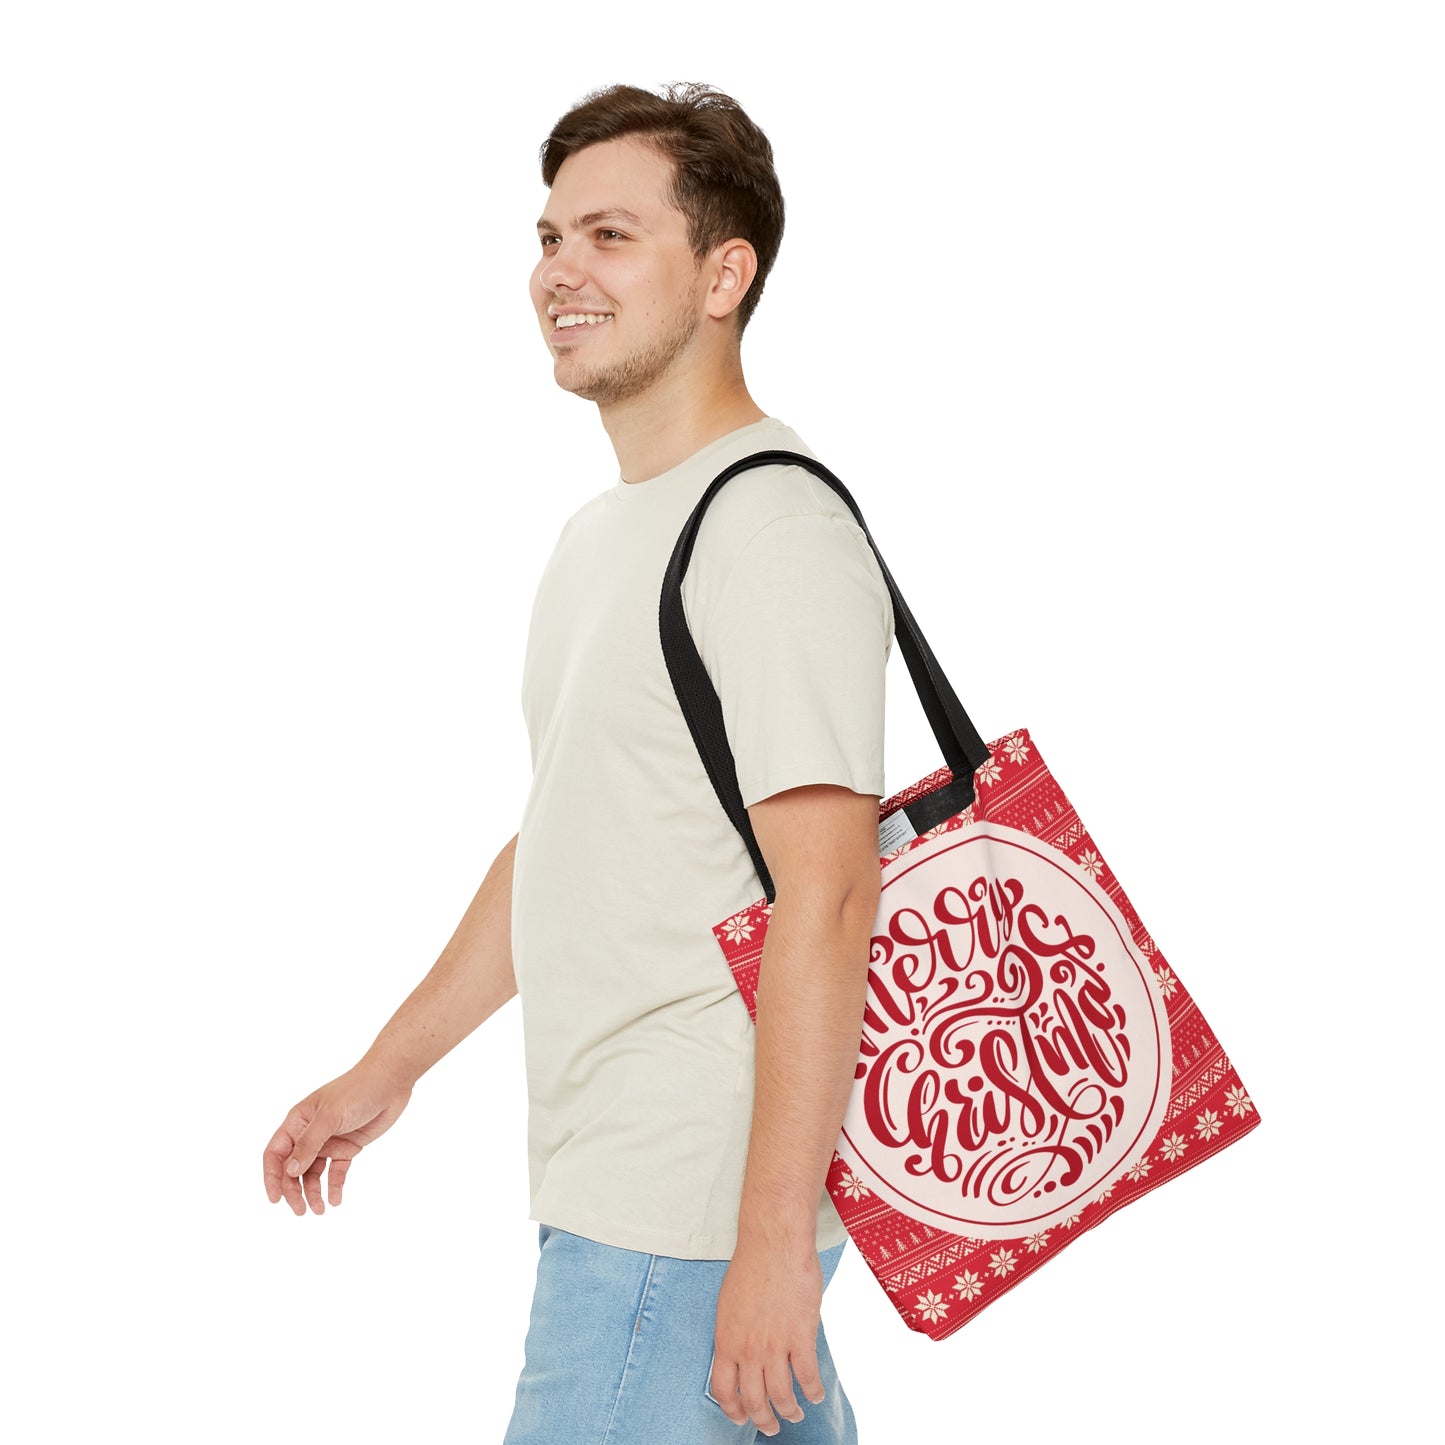 Red Merry Christmas Tote Bags, Reusable Tote Bags